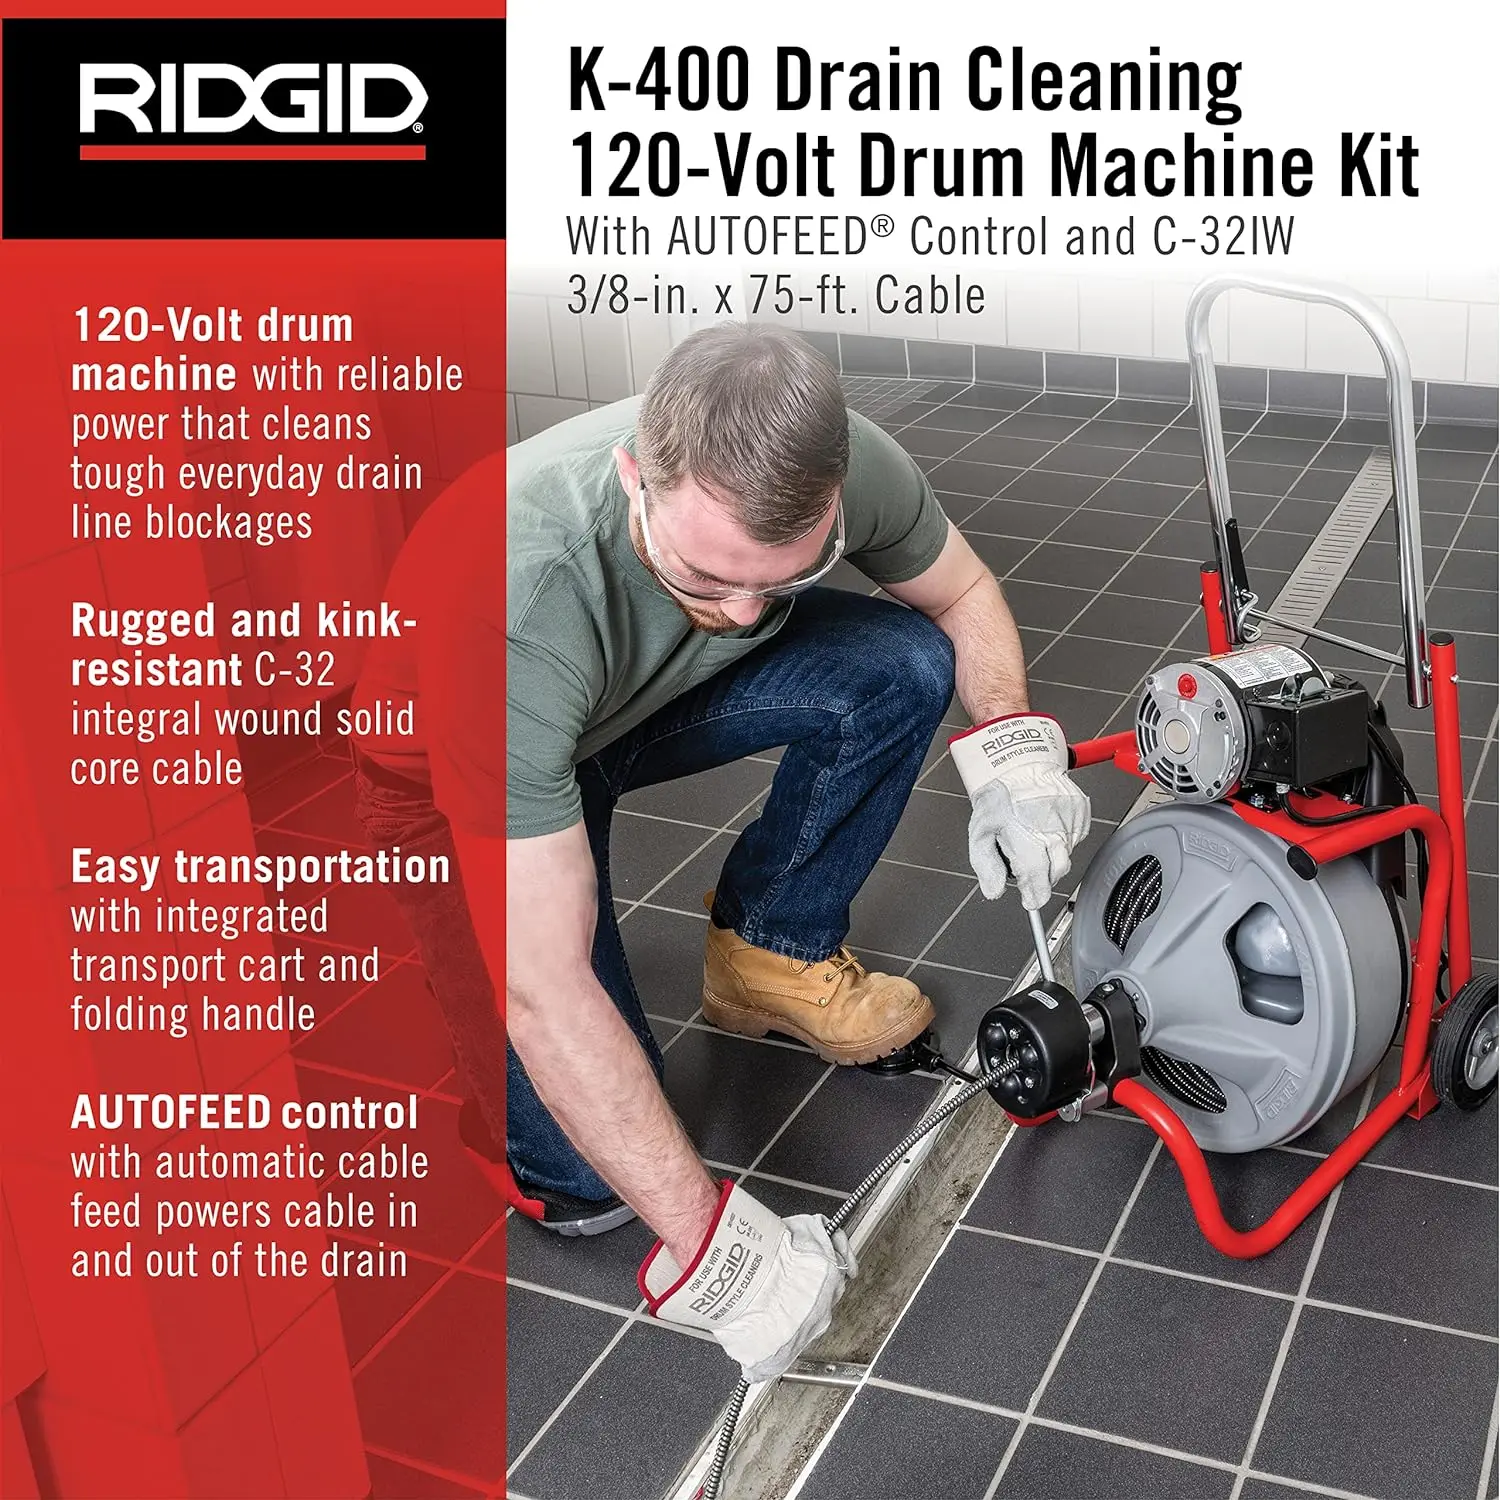 

RIDGID K-400 Drain Cleaning 115-Volt Drum Machine Kit with AUTOFEED Control and C-32IW 3/8" x 75' Cable